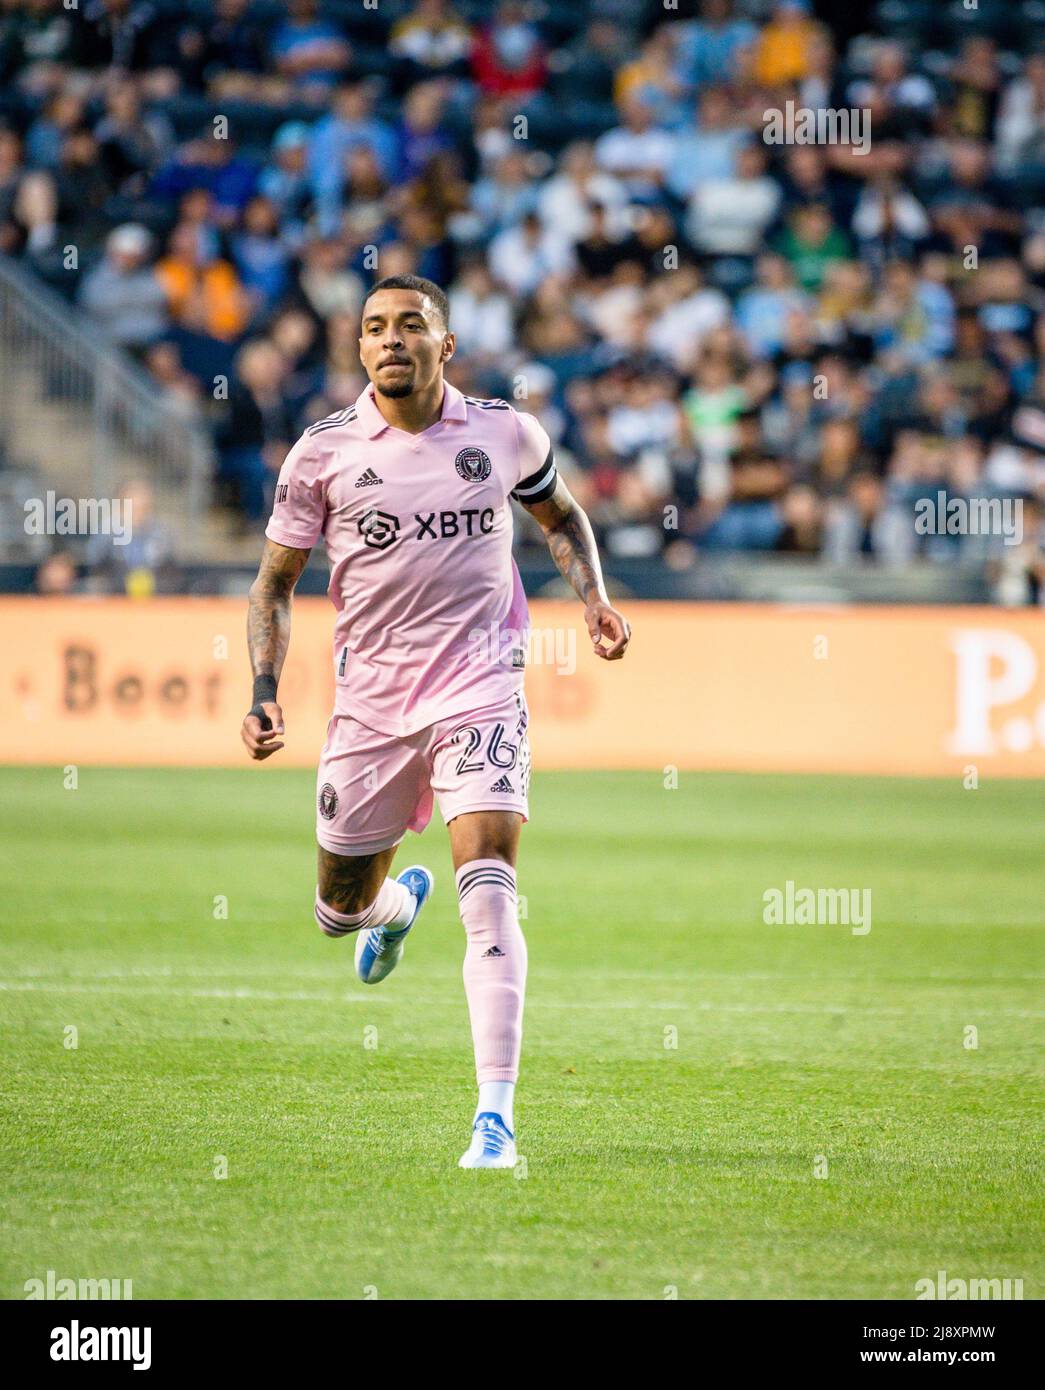 Chester, Pennsylvania, USA. 18th May, 2022. May 18, 2022, Chester PA-Inter Miami CF player GREGORE (26) in action during the match against the Philadelphia Union at Subaru Park, (Credit Image: © Ricky Fitchett/ZUMA Press Wire) Credit: ZUMA Press, Inc./Alamy Live News Stock Photo